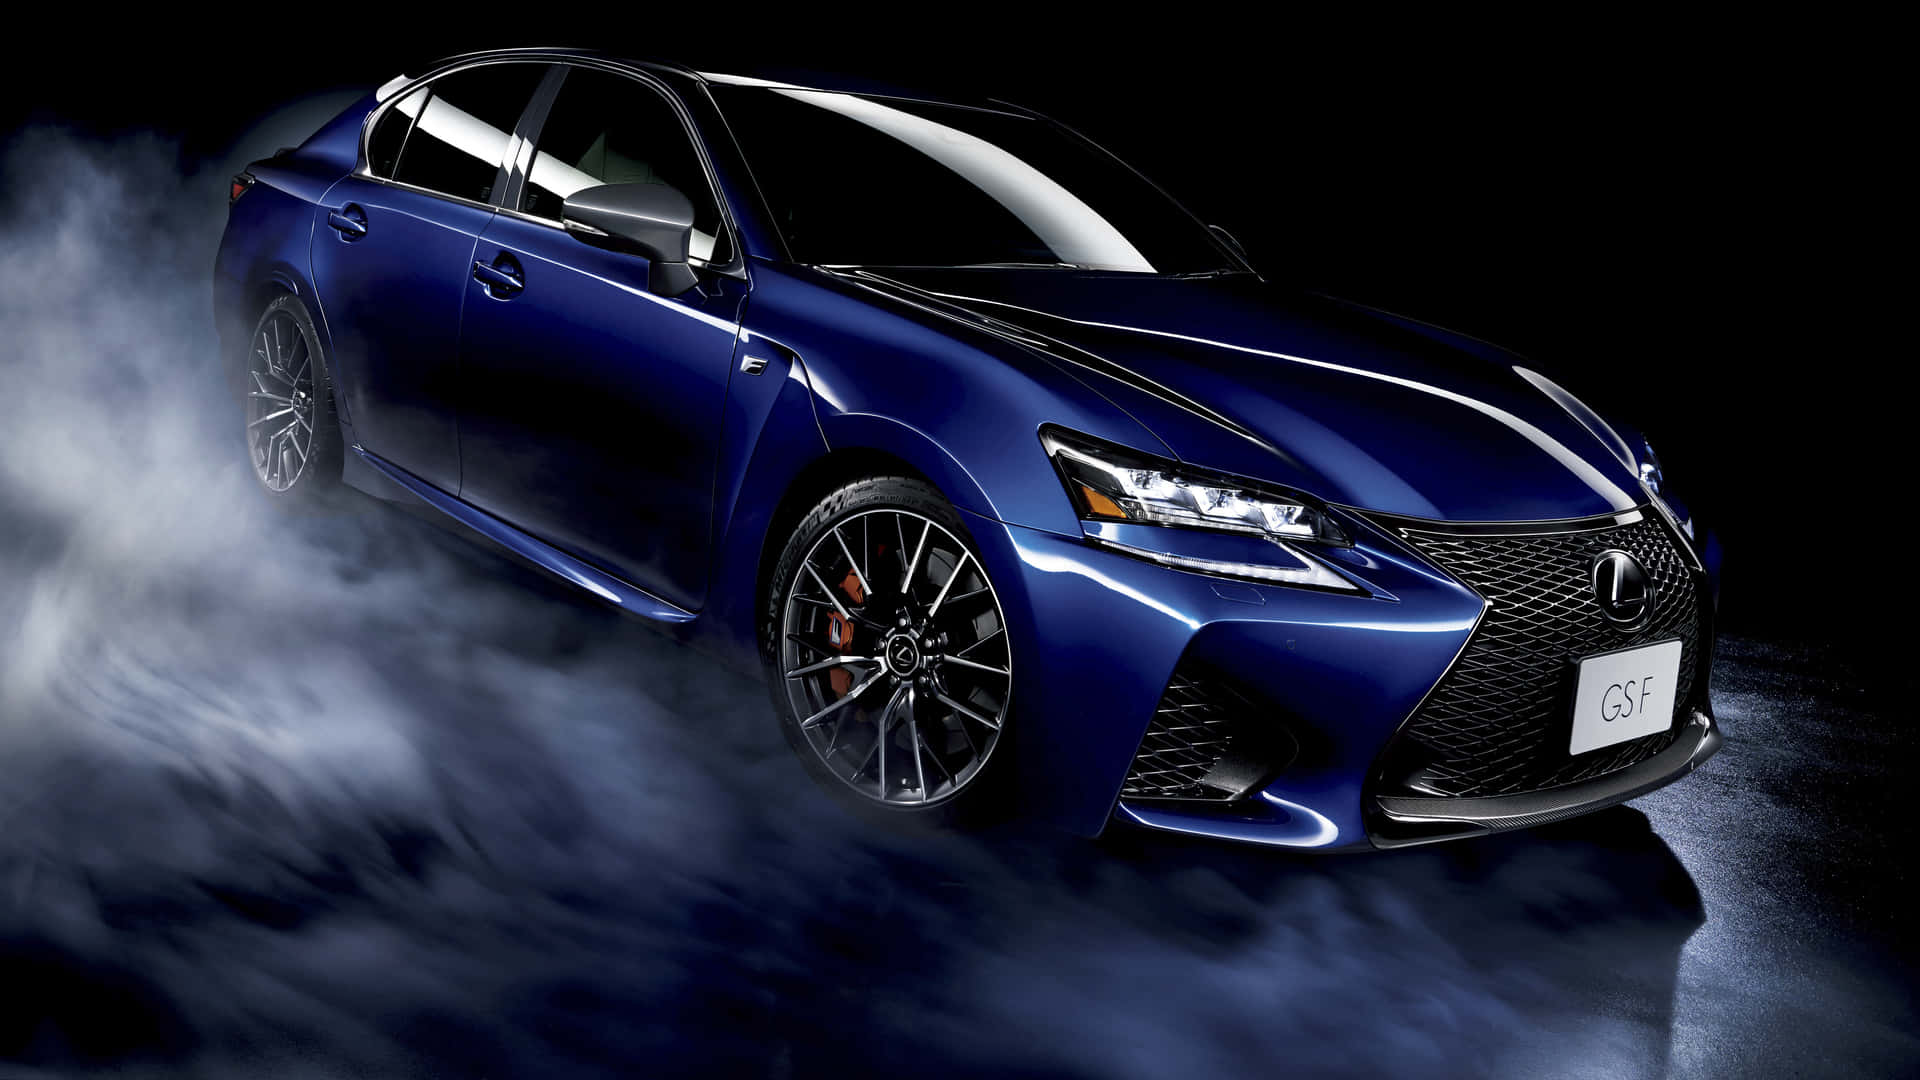 Captivating Lexus GS Showcased in a Vibrant Environment Wallpaper